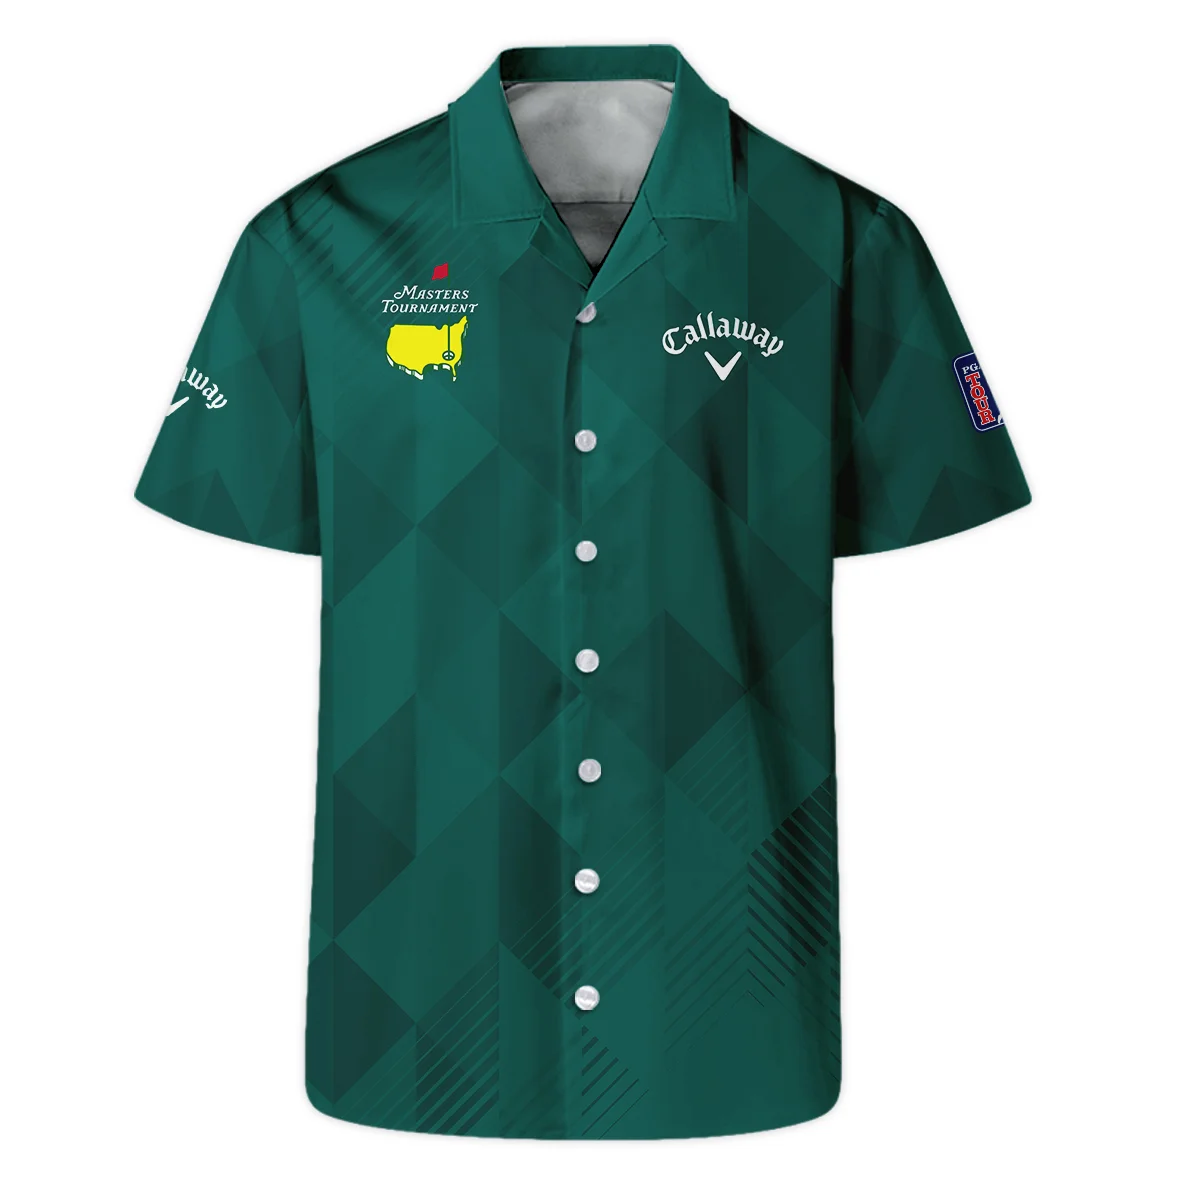 Masters Tournament Golf Sport Callaway Polo Shirt Sports Triangle Abstract Green Polo Shirt For Men